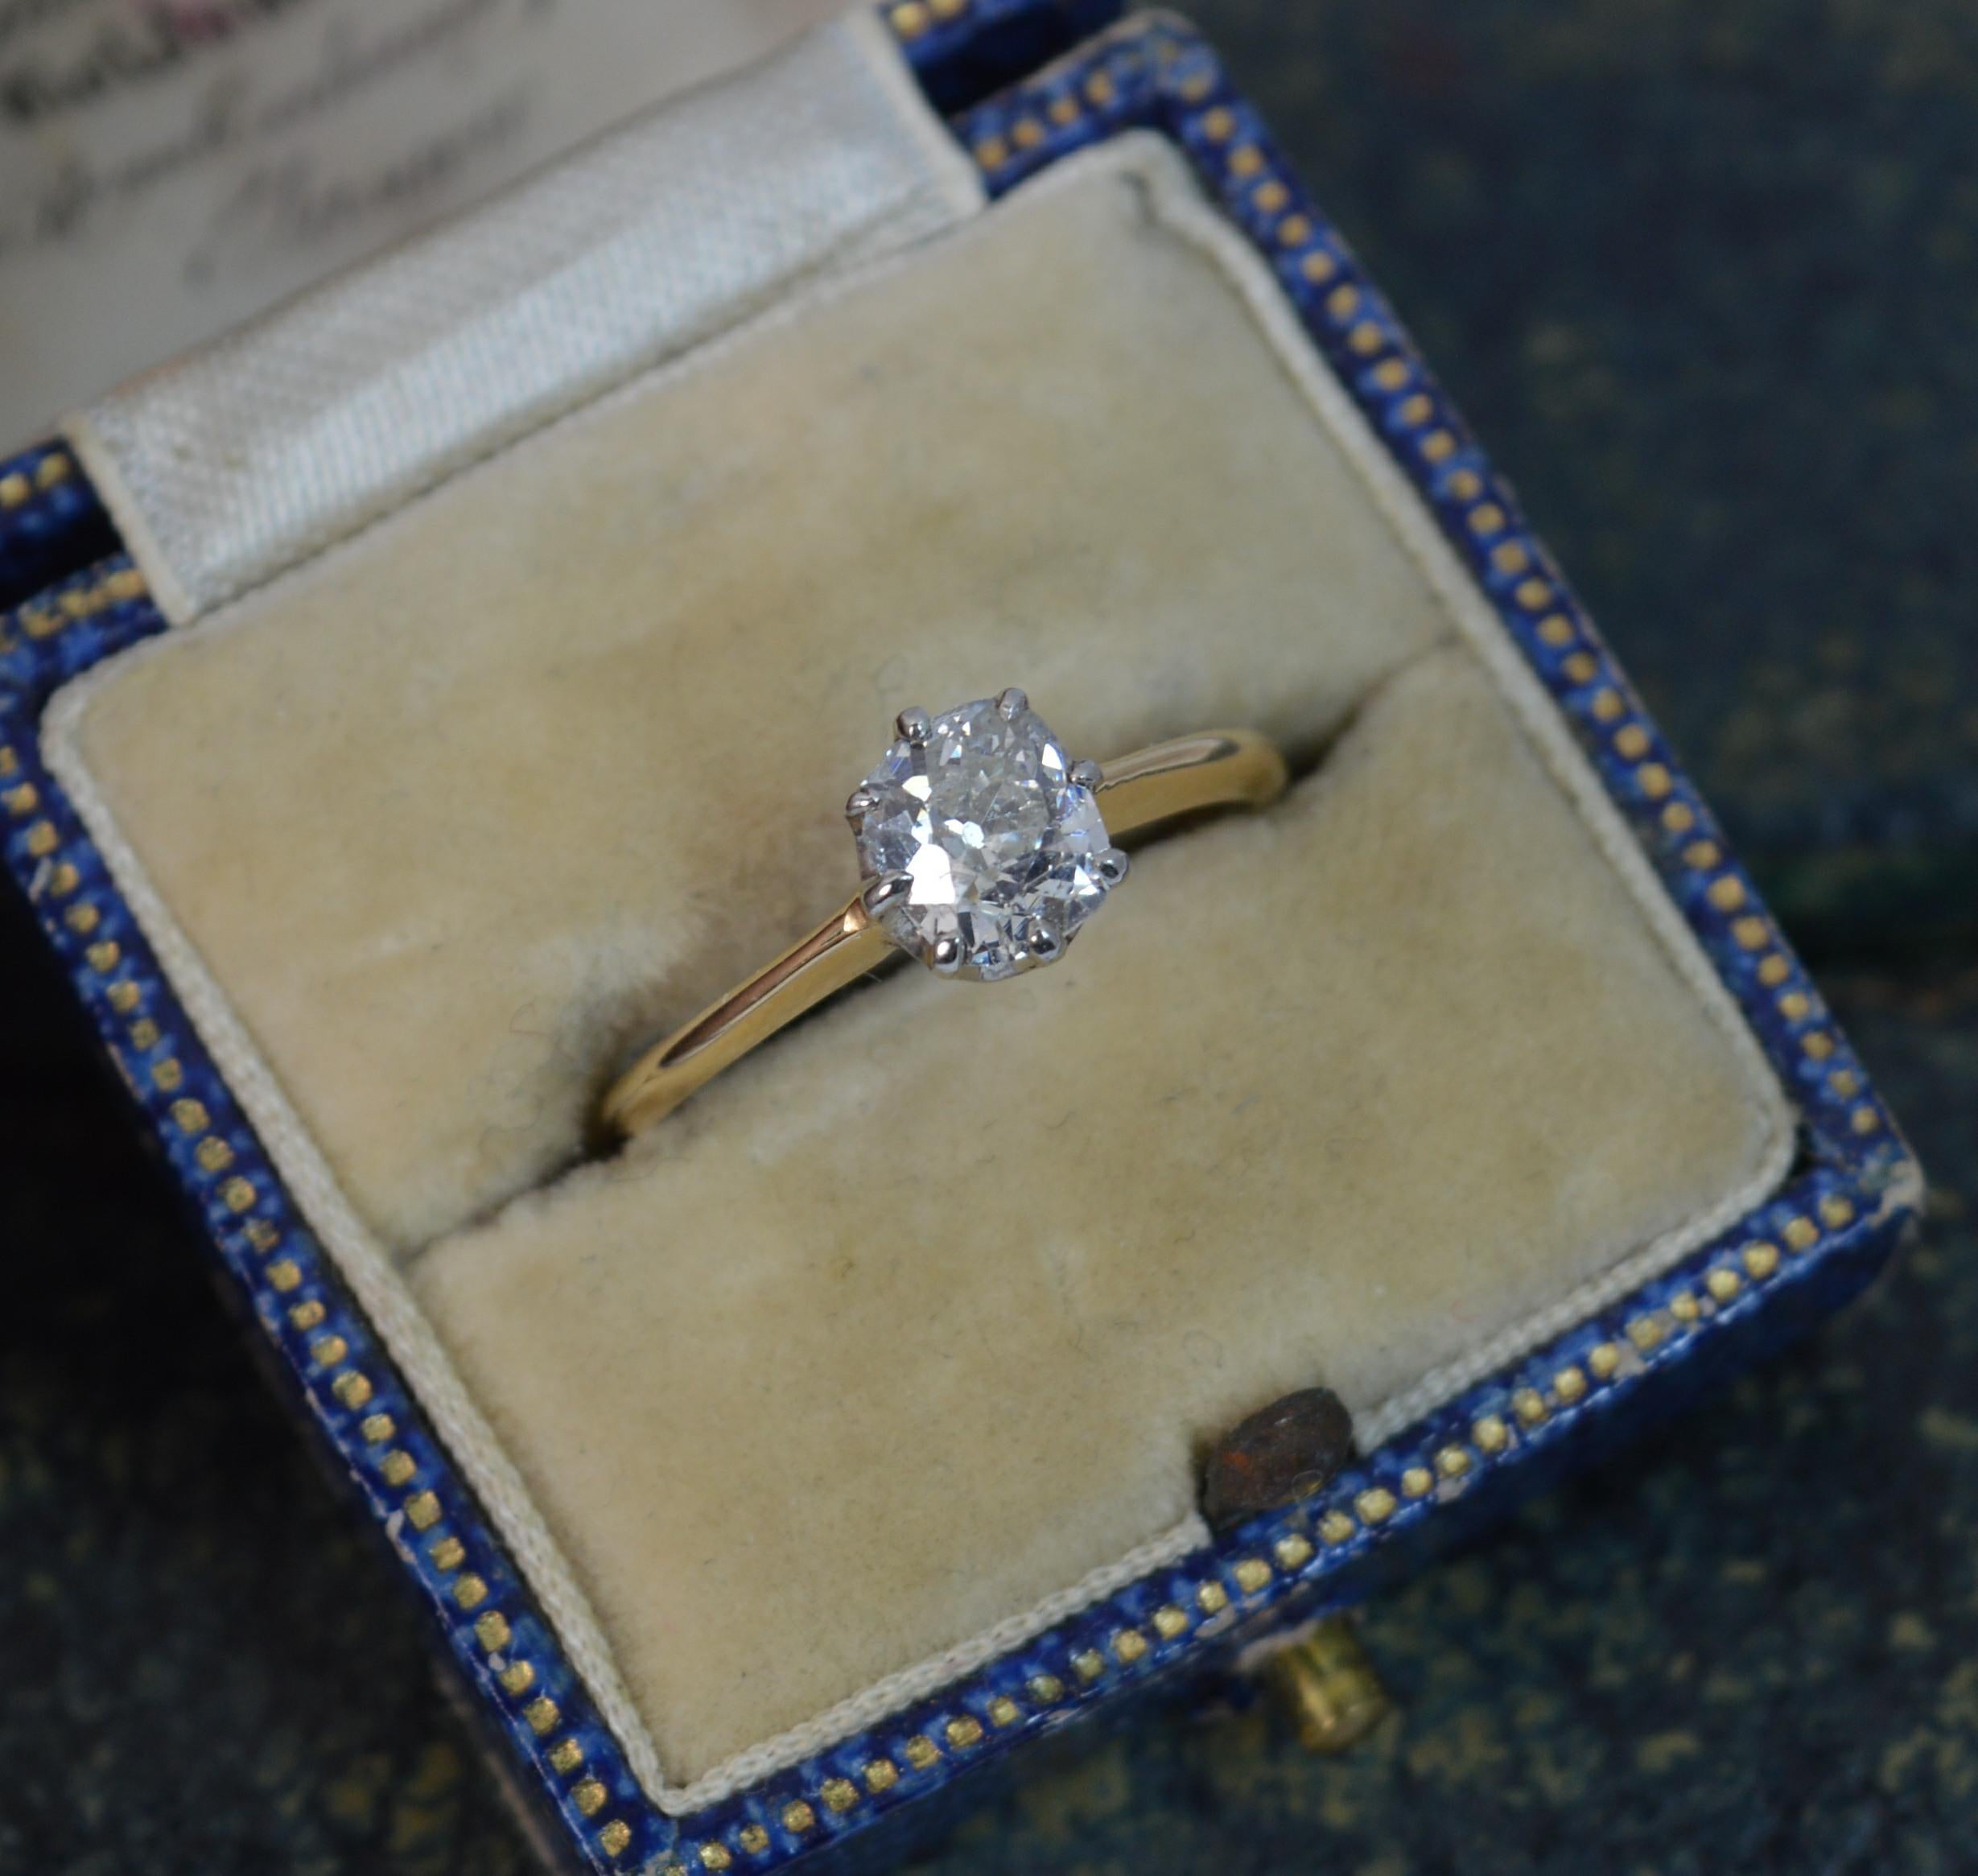 A true antique engagement ring. Victorian era, c1890.
SIZE ; M 1/2 UK, 6 1/2 US
​Solid 18 carat yellow gold ring set with a single diamond in platinum claw setting.

​The natural diamond weighs approx 0.8 carats and measures 5.5mm x 6.2mm approx.